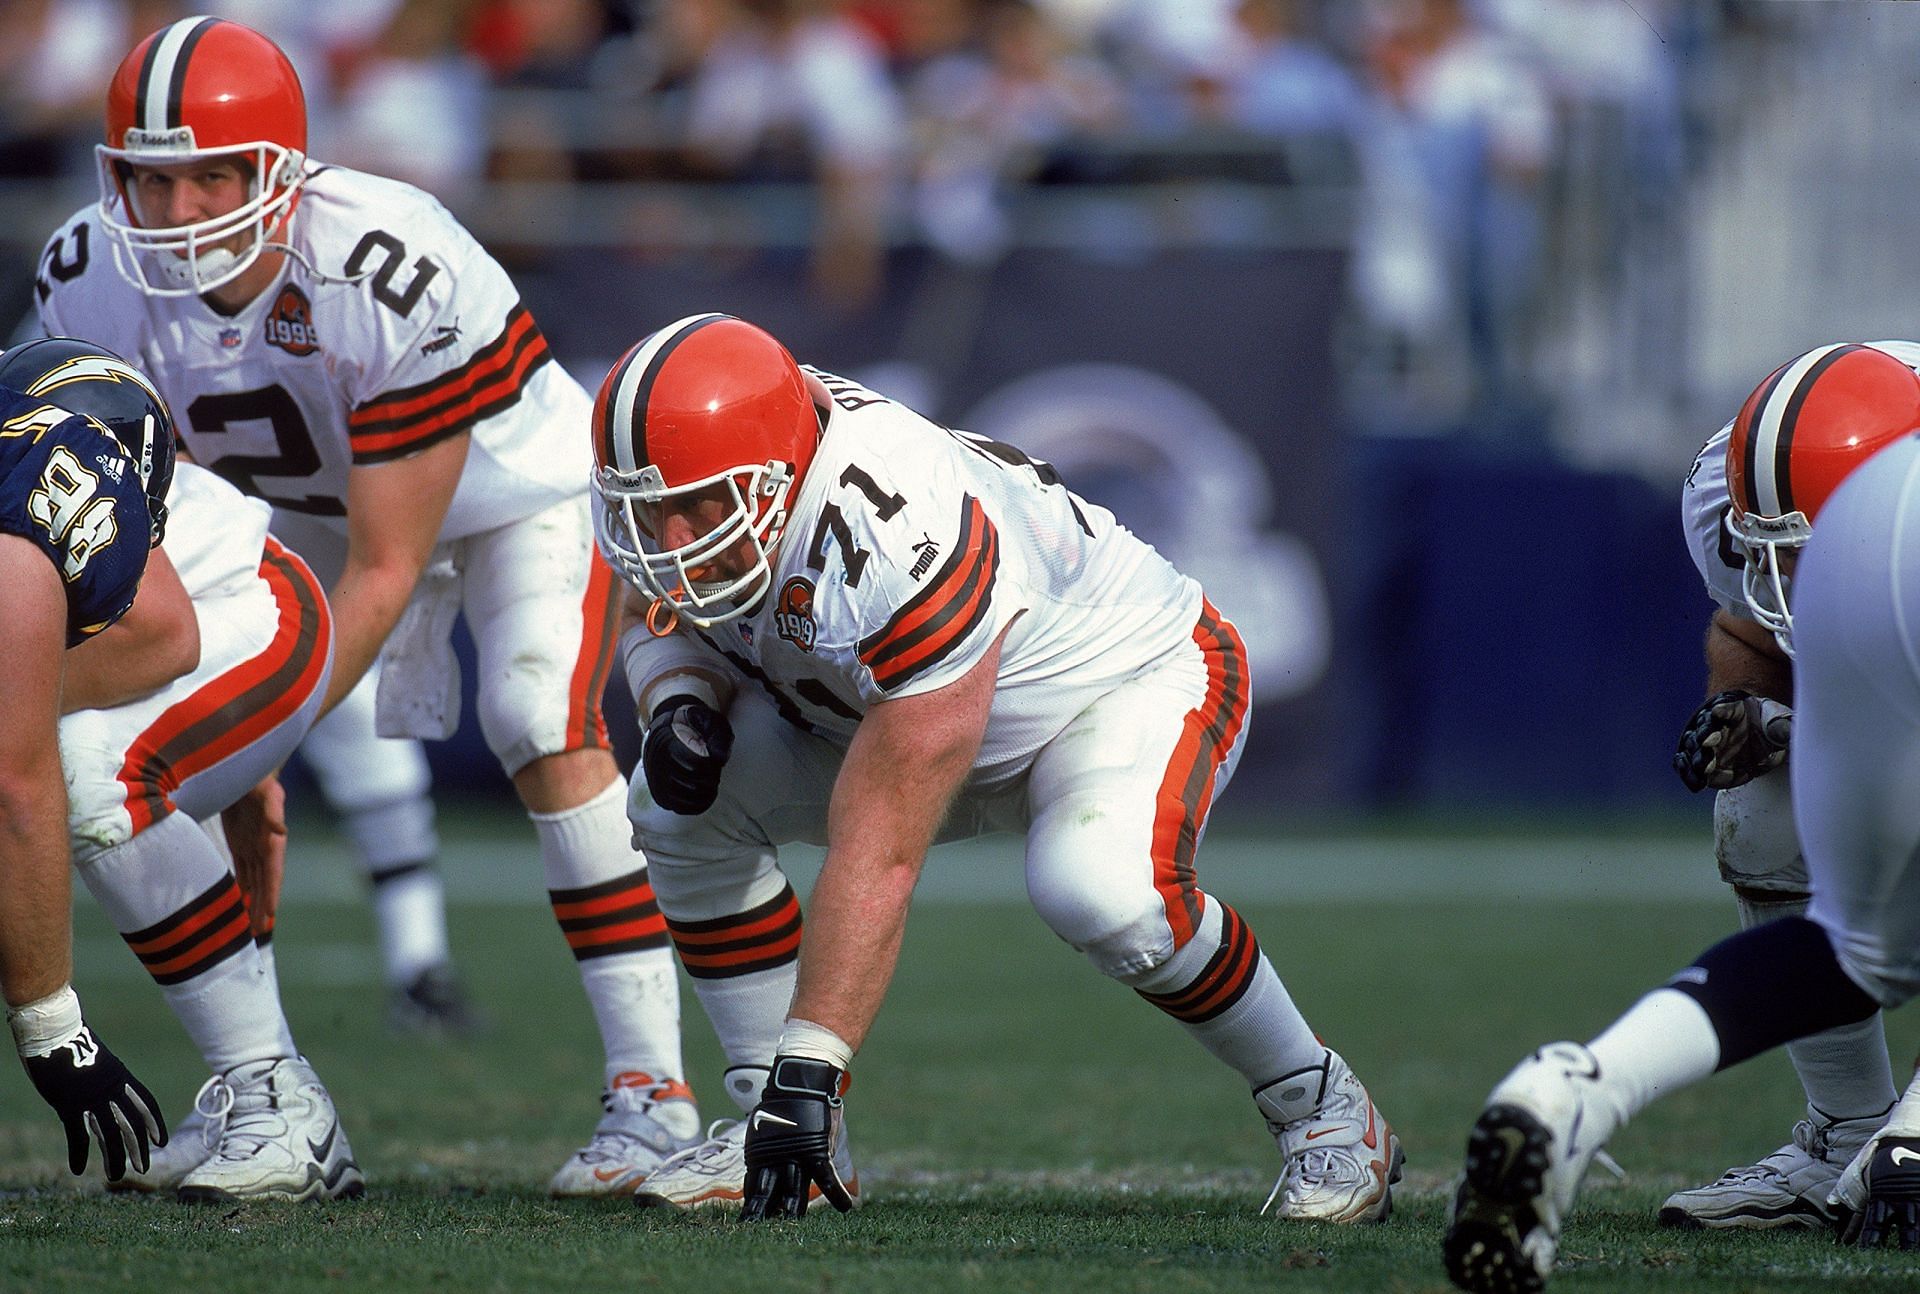 Cleveland Browns offensive lineman Jim Pyne